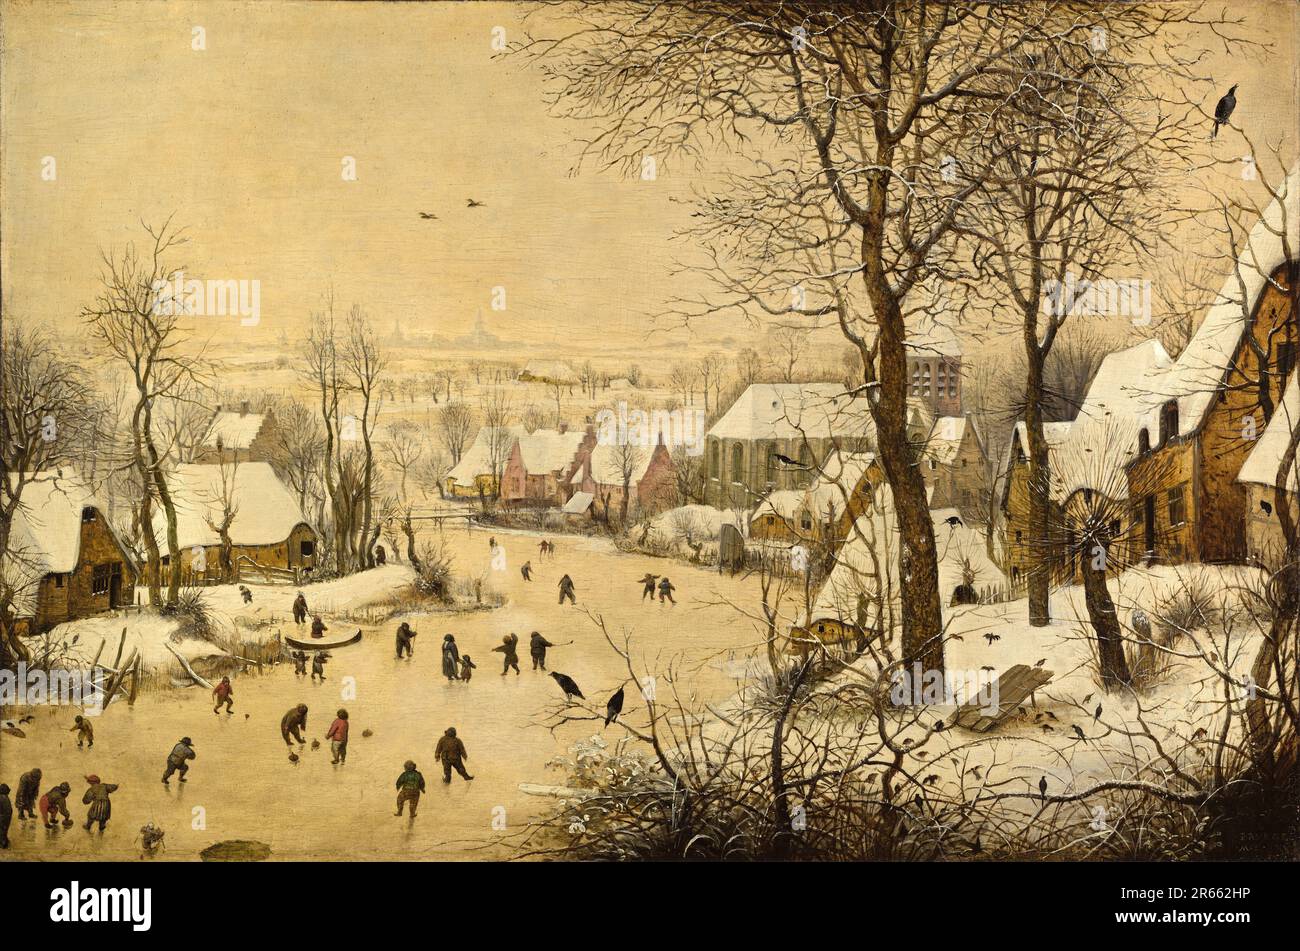 Winter Landscape with Skaters and a Bird Trap painted by the Dutch Renaissance painter Pieter Breughel the Elder in 1565. Breughel was the most important painter of the Dutch and Flemish Renaissance. His choice of subjects was influential, he rejected portraits and religious scenes in favour of local and peasant scenes. Stock Photo